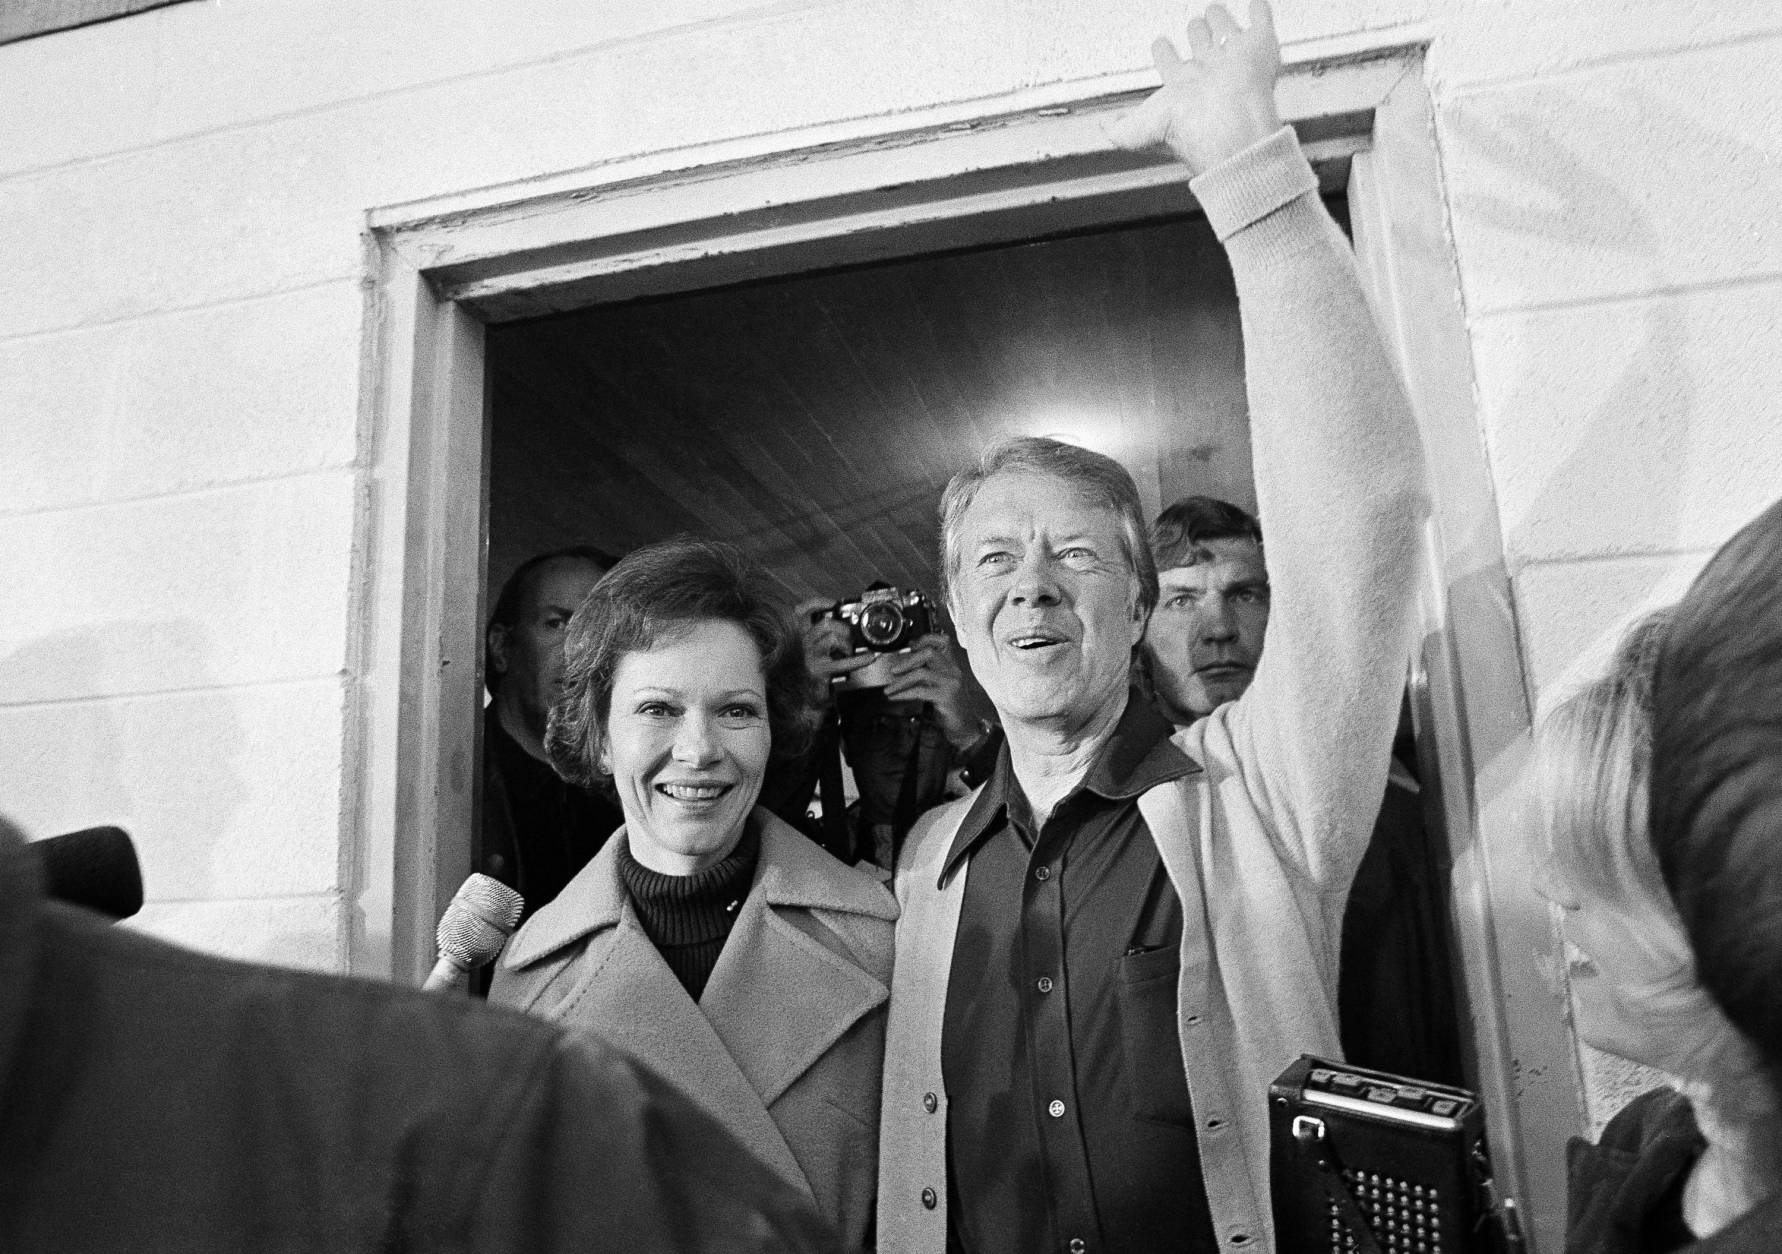 Democratic presidential candidate Jimmy Carter and his wife Rosalynn depart the Plains, Ga.,  polling place, Nov. 2, 1976.  The candidate was the fifth person to vote in his precinct. The former governor will spend the day resting up for an evening in Atlanta where he will watch the returns. (AP Photo)